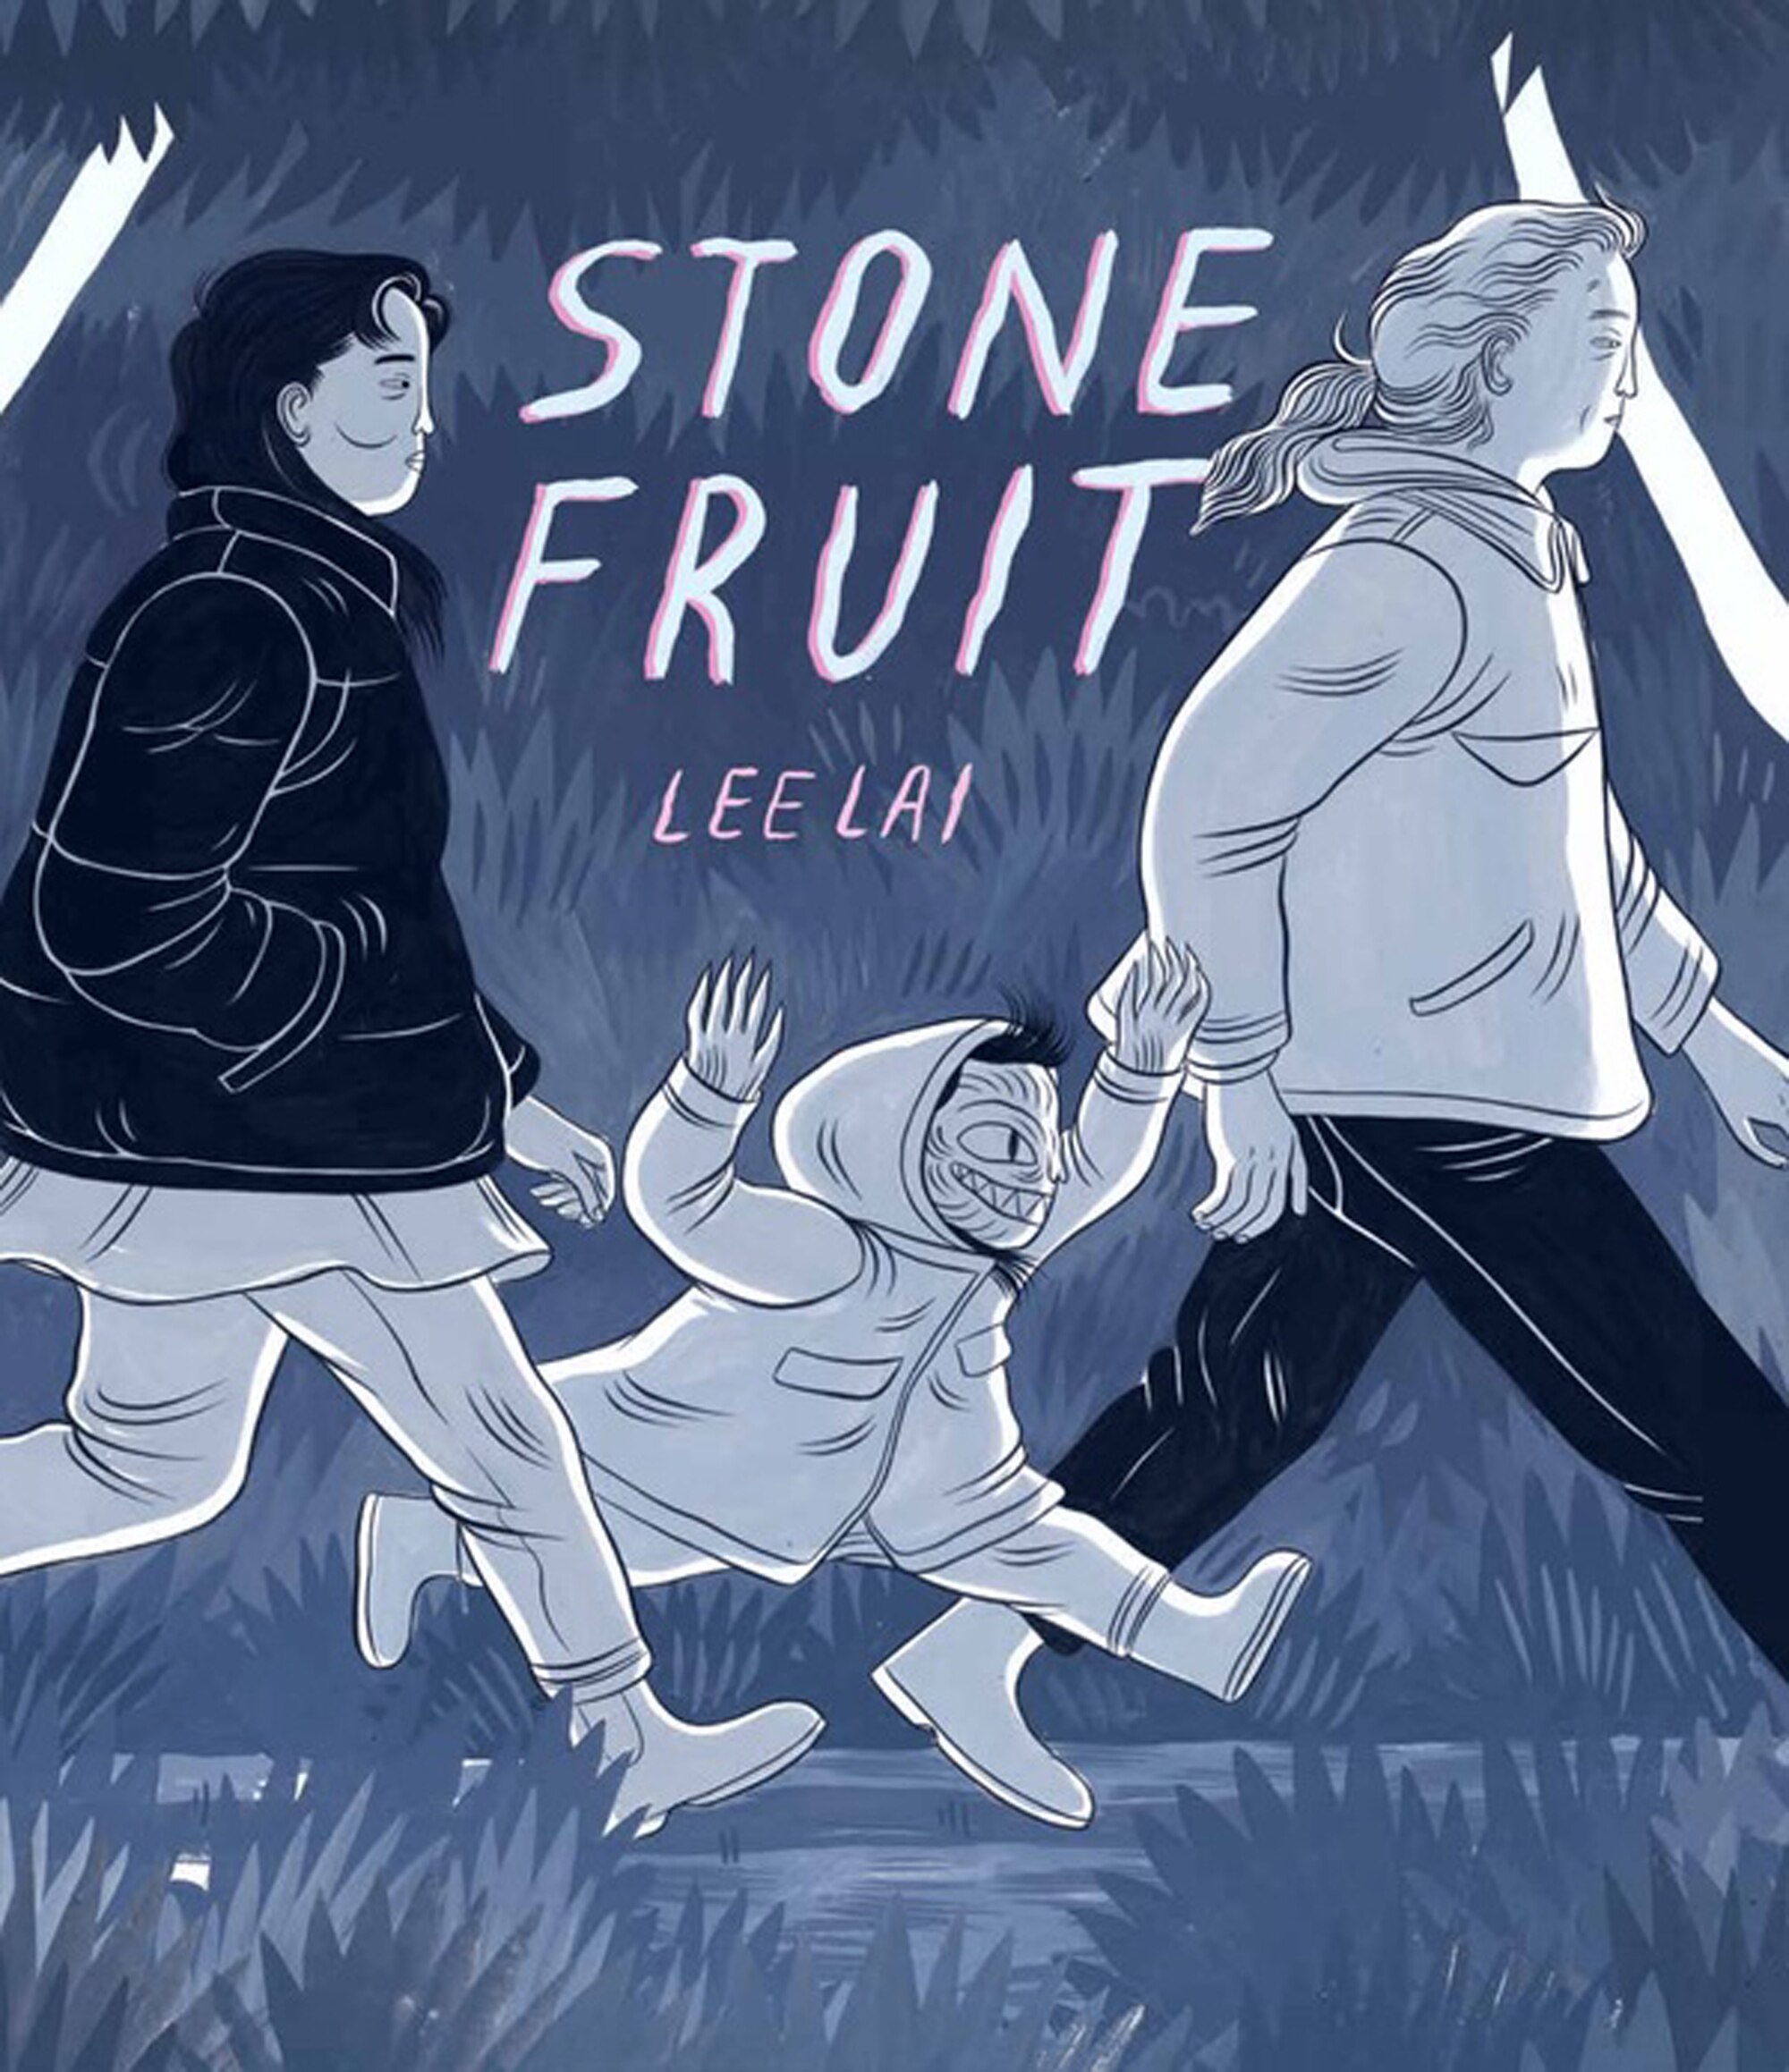 The book cover for Stone Fruit by Lee Lai features an illustration of a man, a woman and a child walking through a woodland.